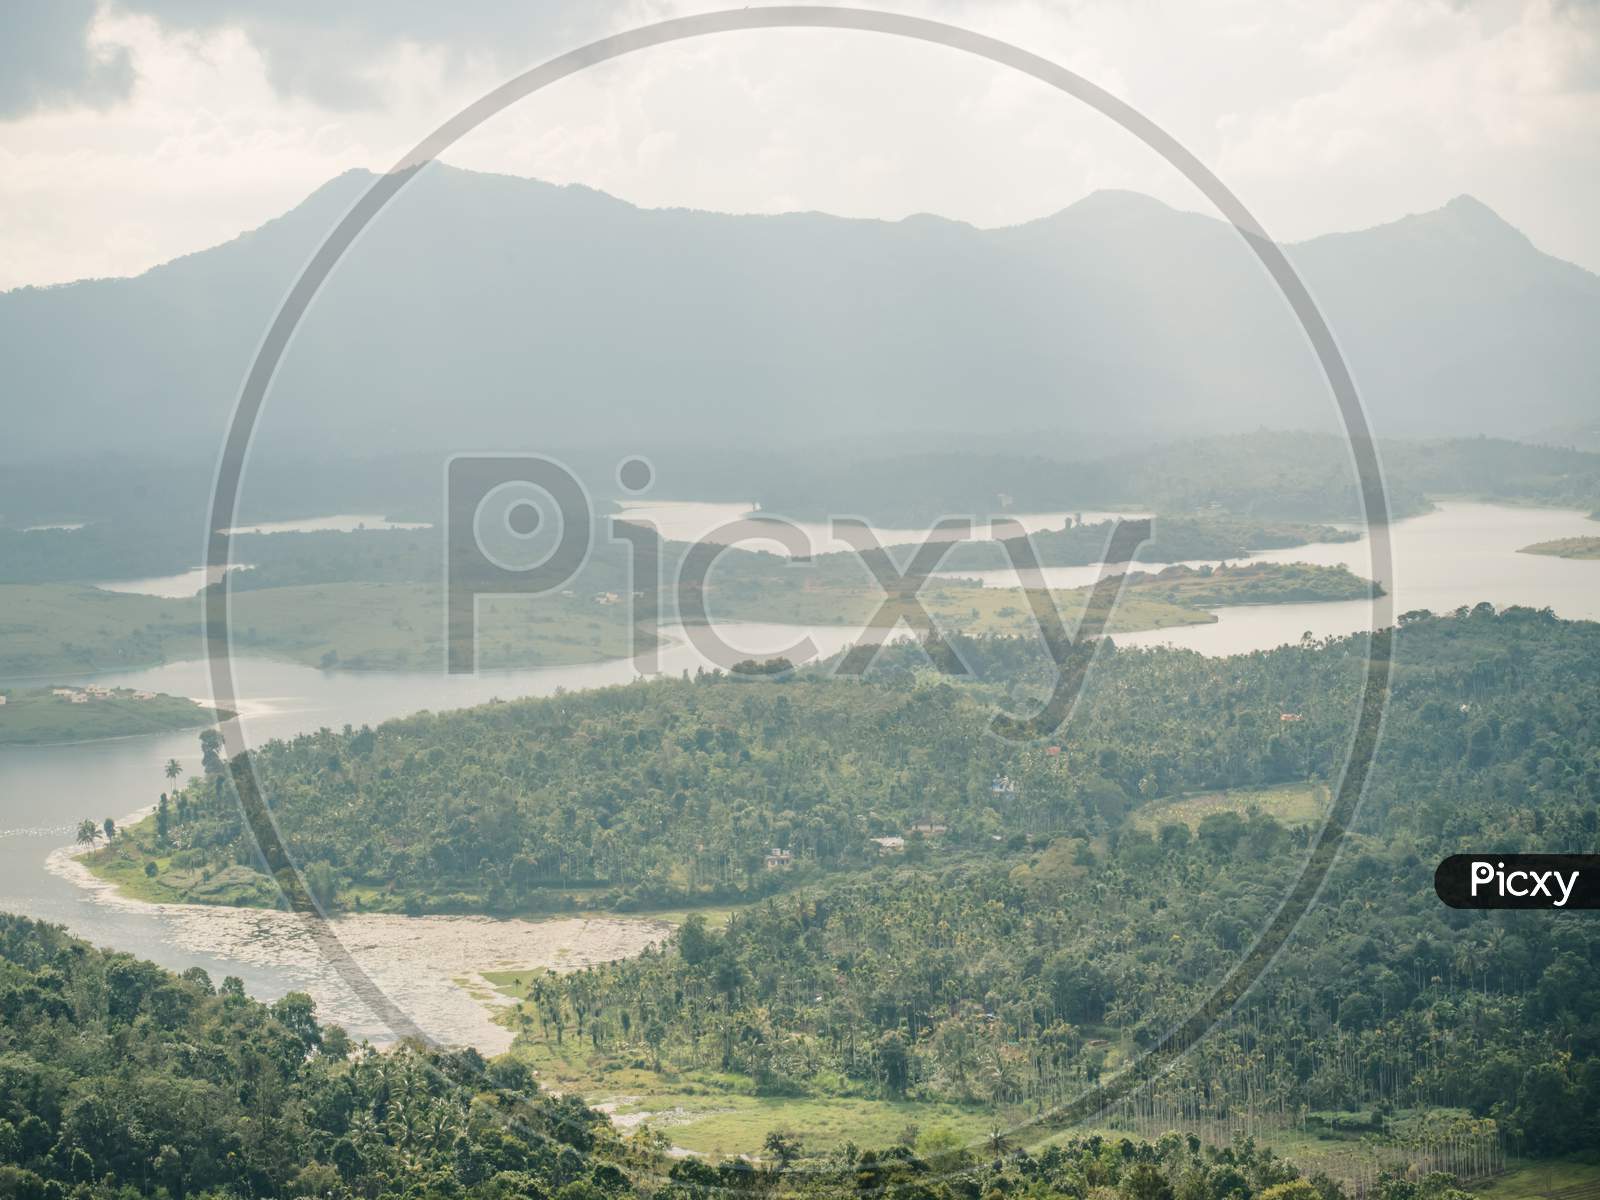 Landscape View Of Karapuzha Dam From The Top Of Manjapaara Hill In Ambalavayal, Wayanad. Background For Posters.